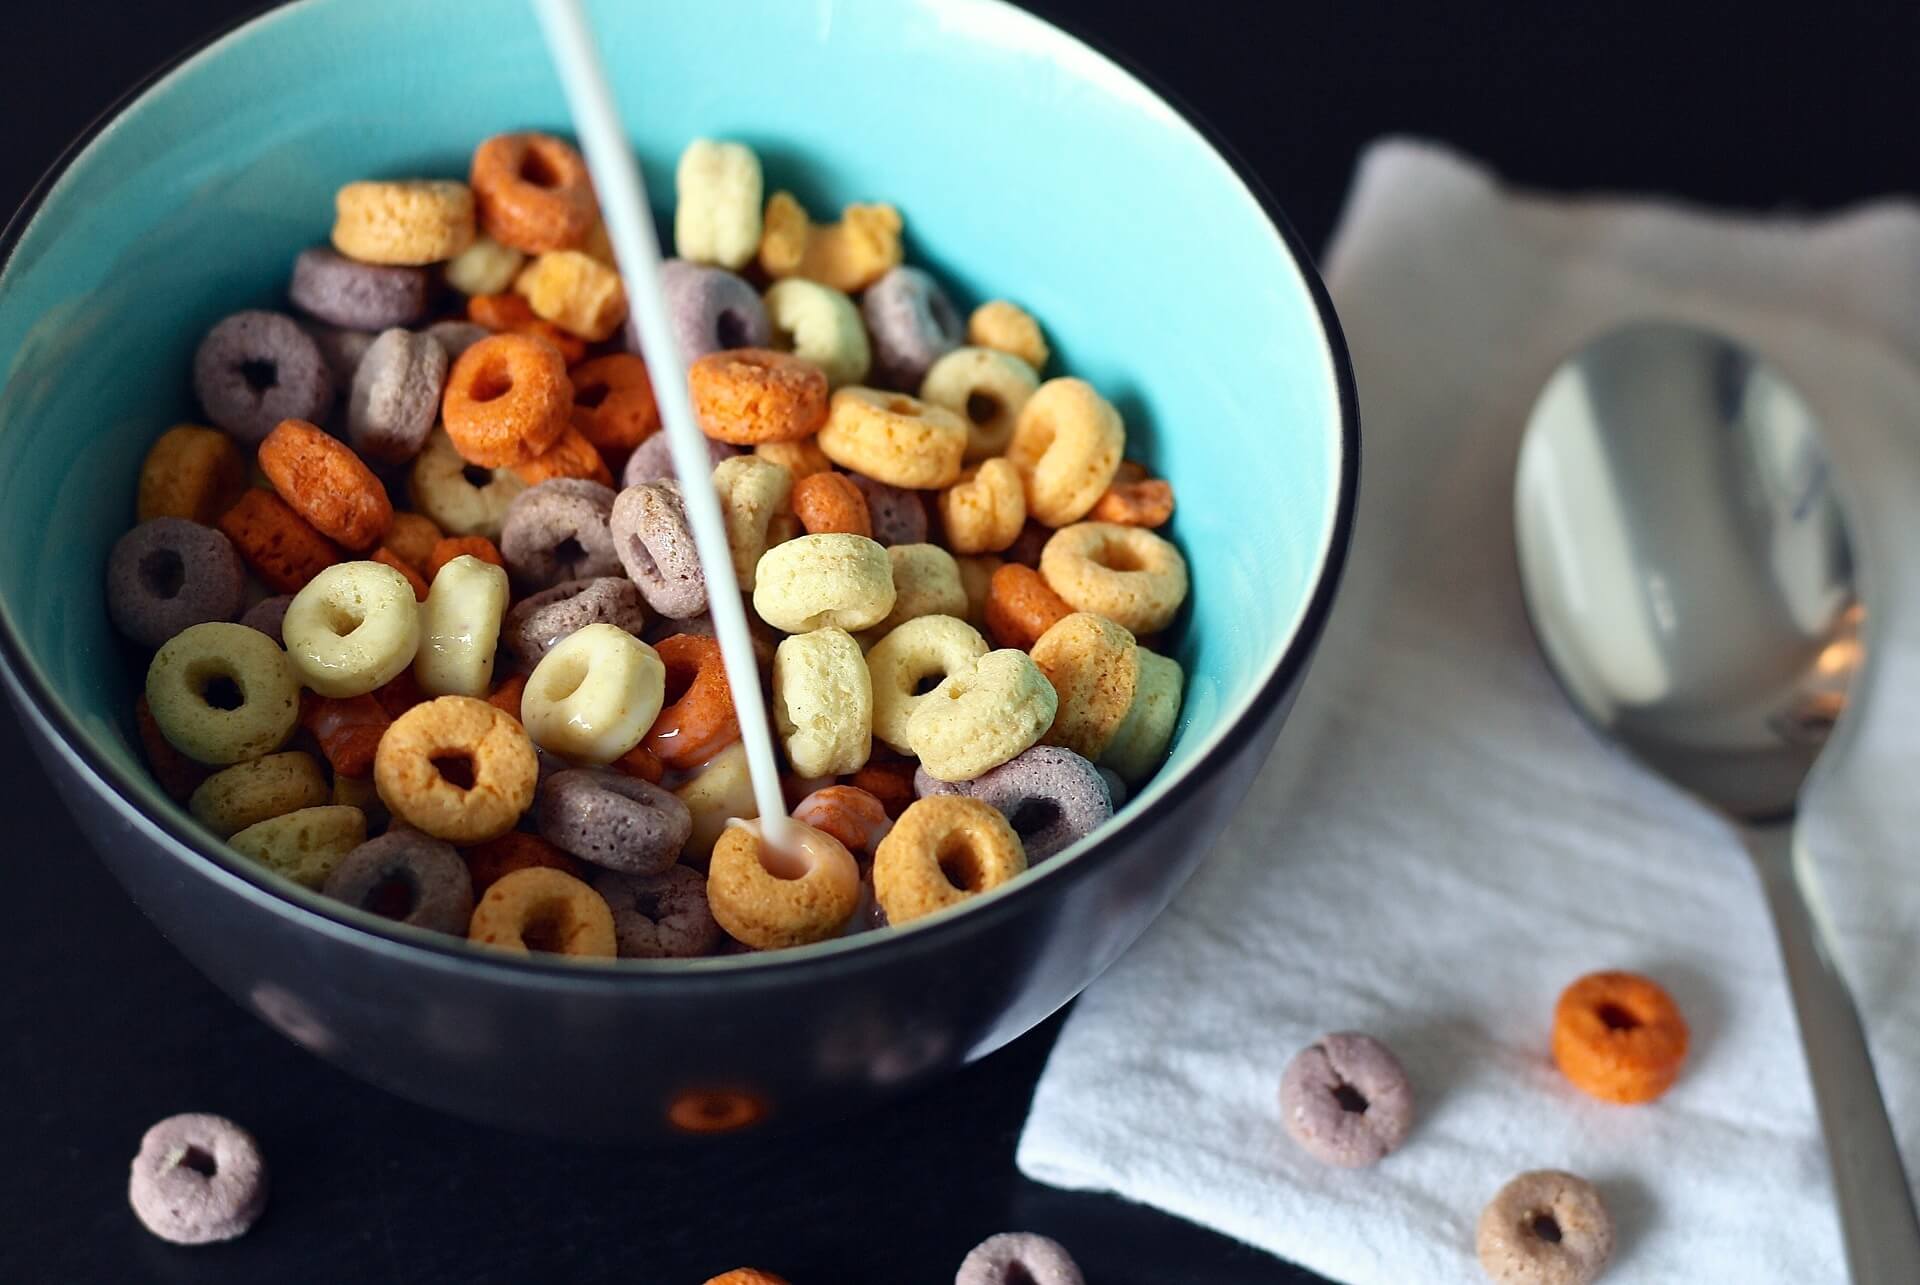 Baby Shark Cereal Is Now a Thing